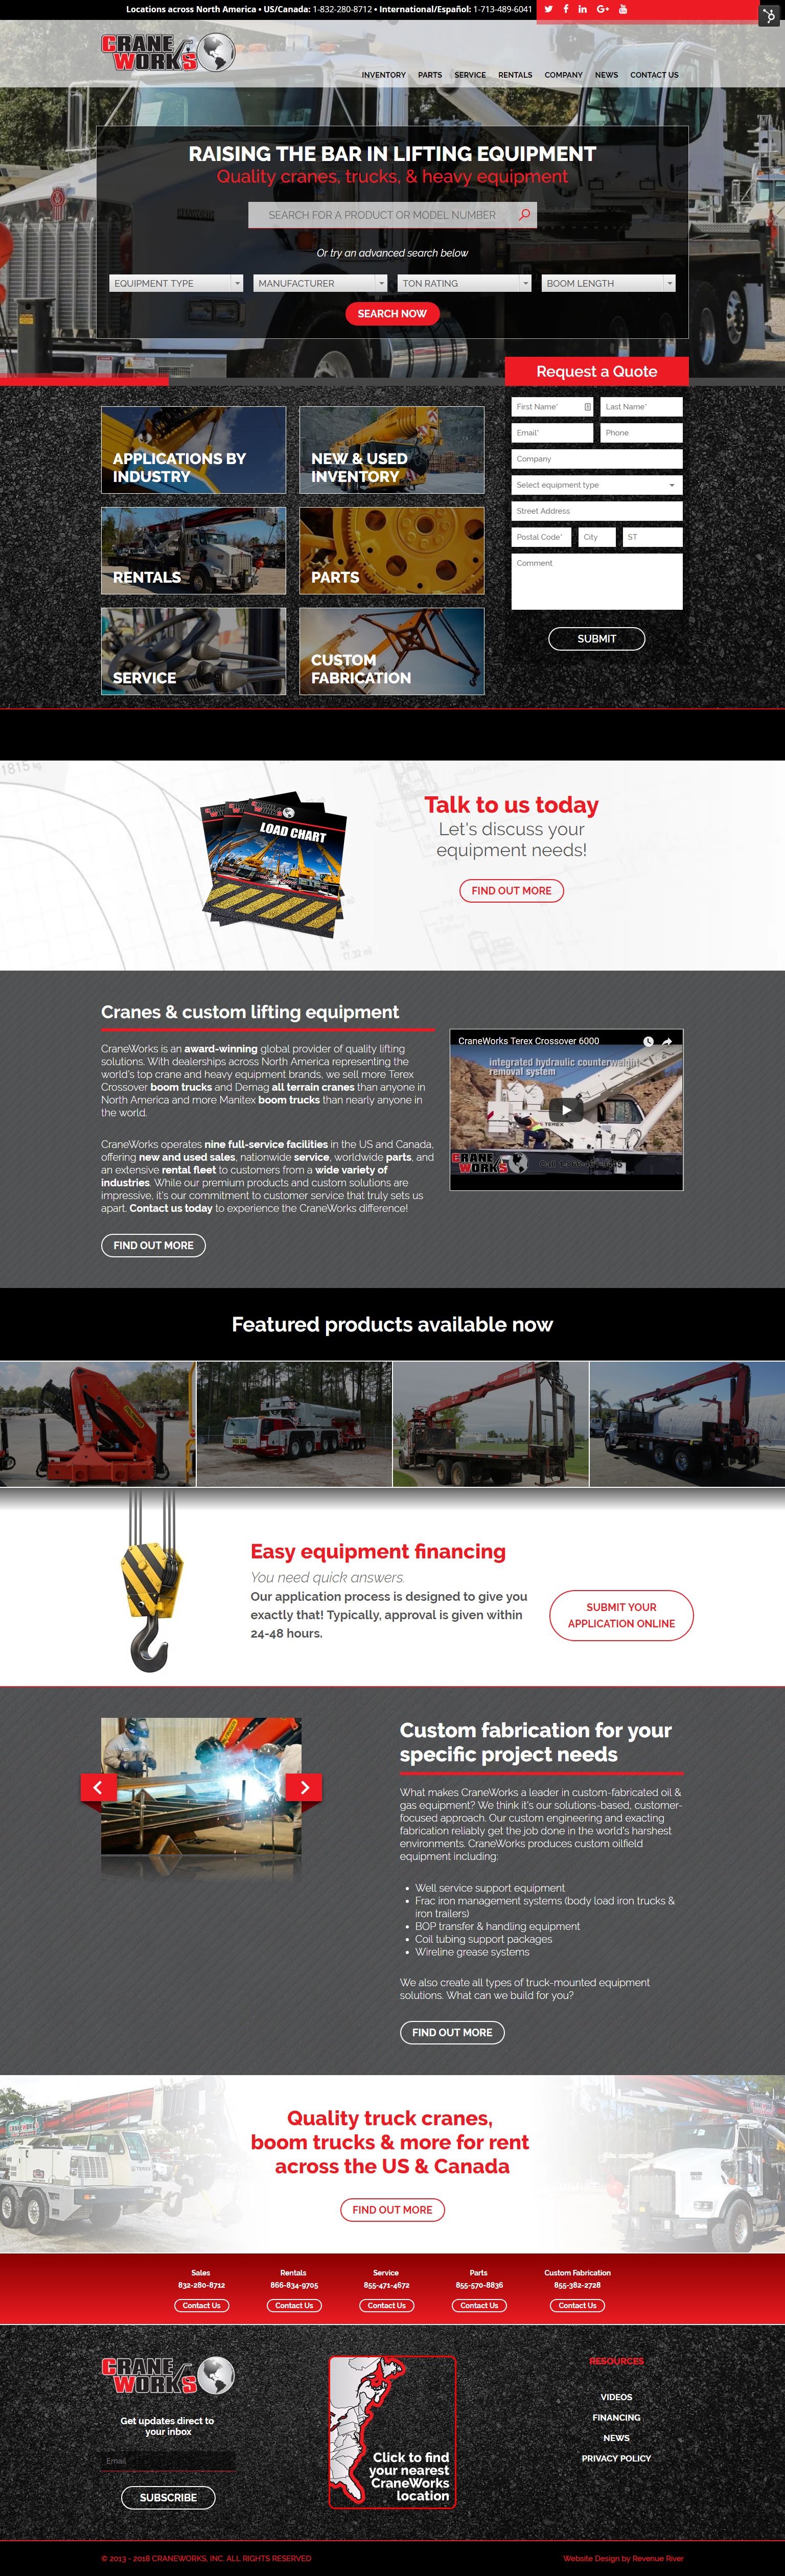 craneworks new home page